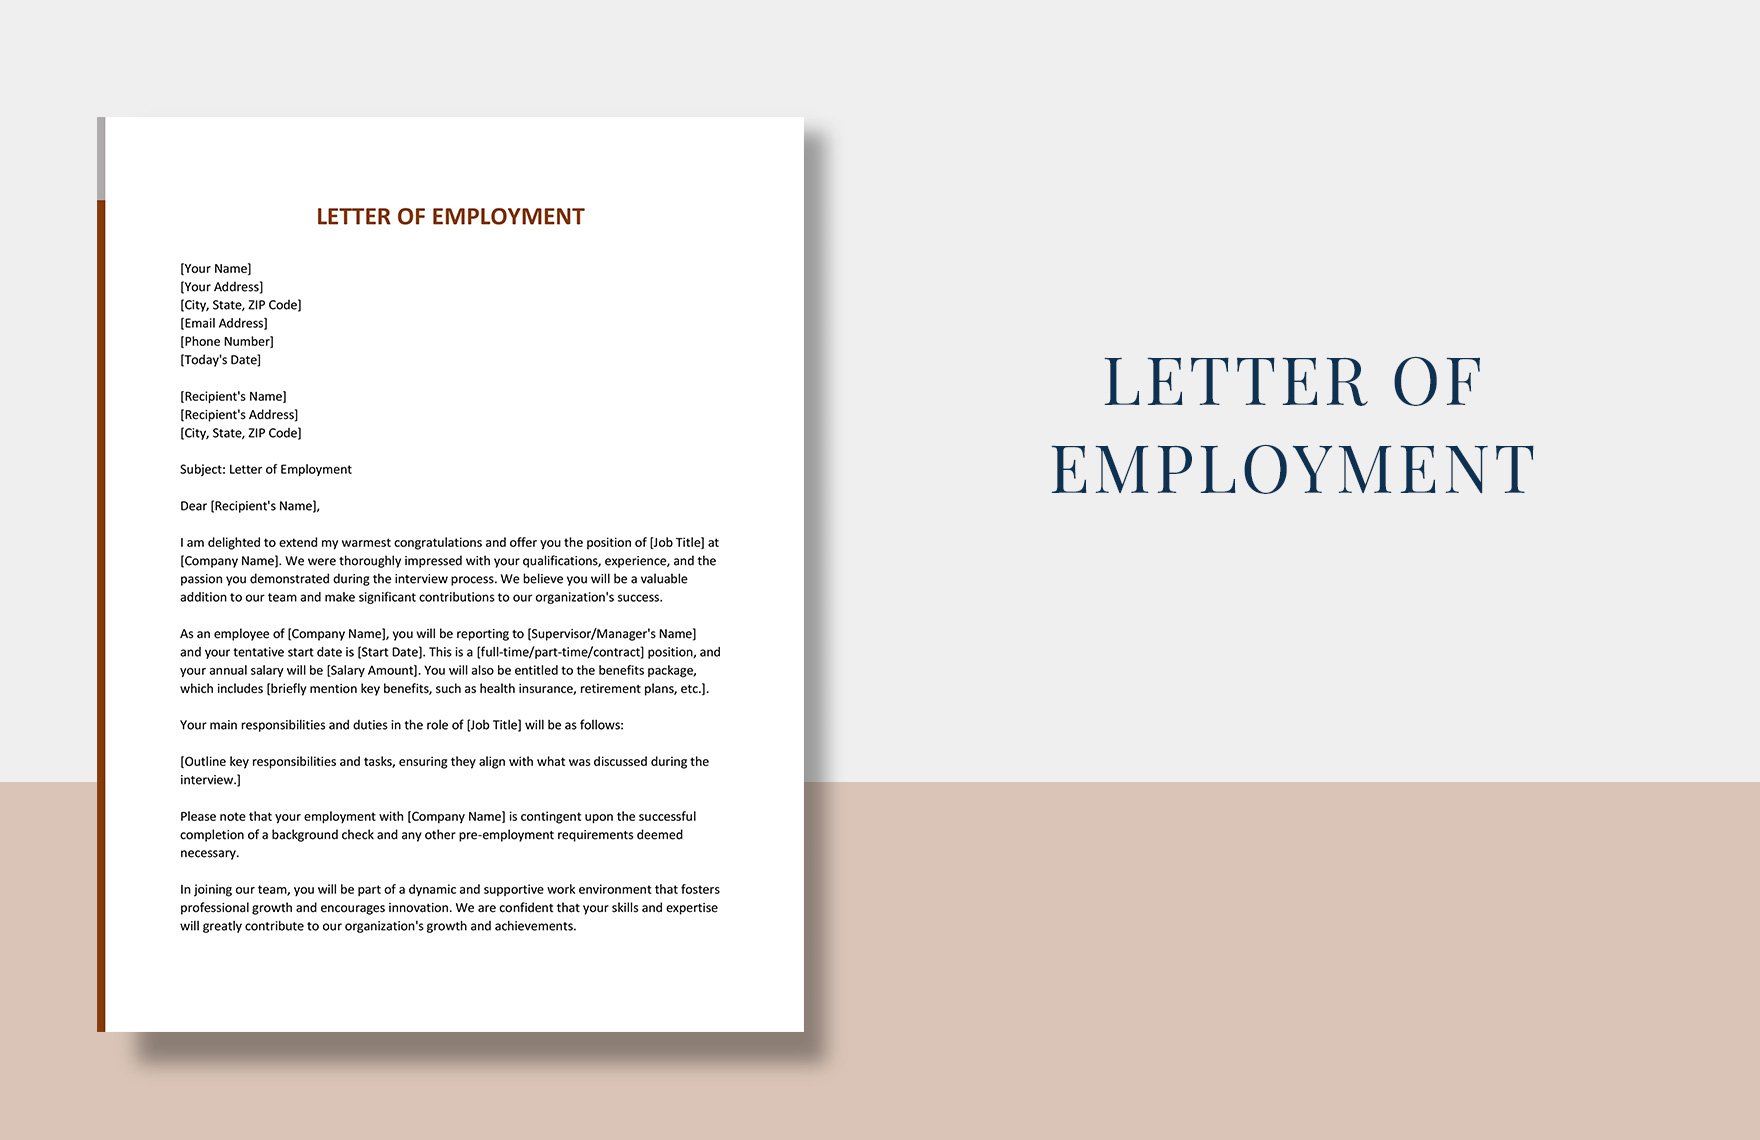 letter-of-employment